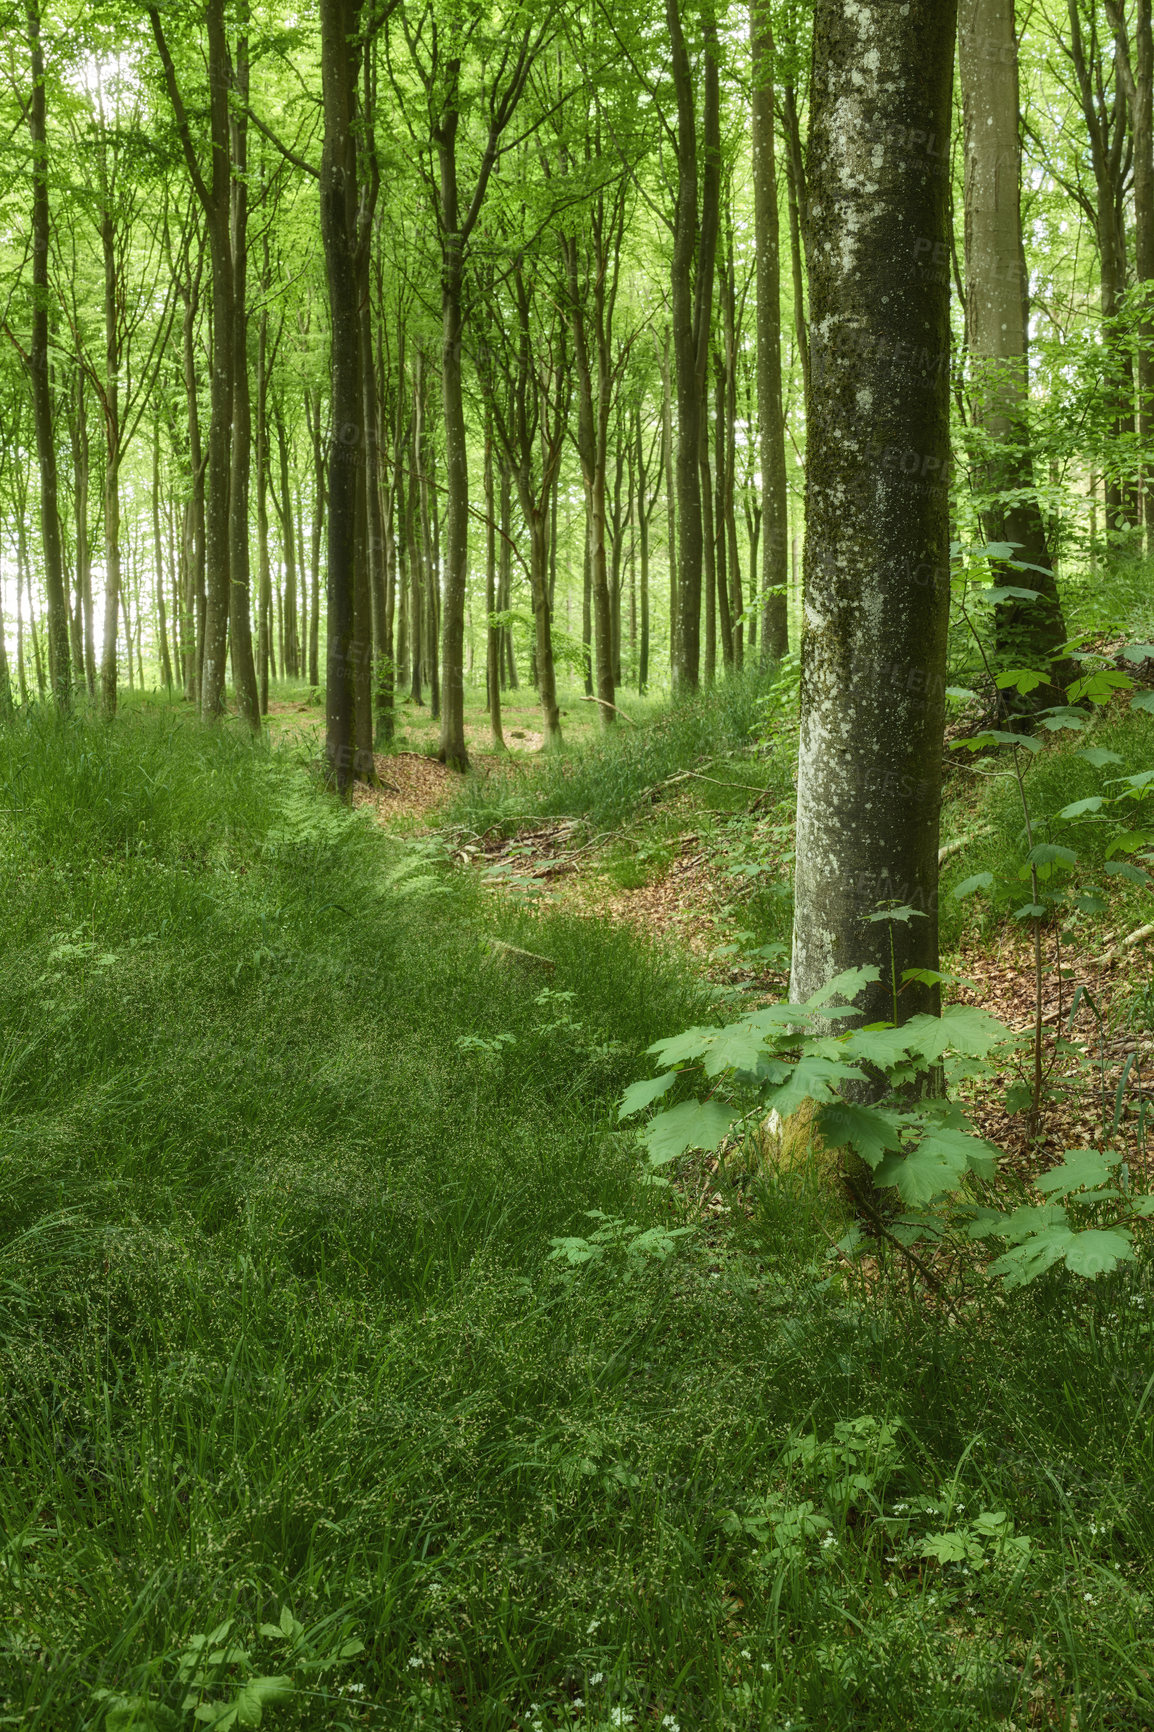 Buy stock photo Beech trees growing in mystical, lush and overgrown deciduous forest in remote, serene and quiet meadow or countryside. Landscape view of texture detail on plants in environmental nature conservation